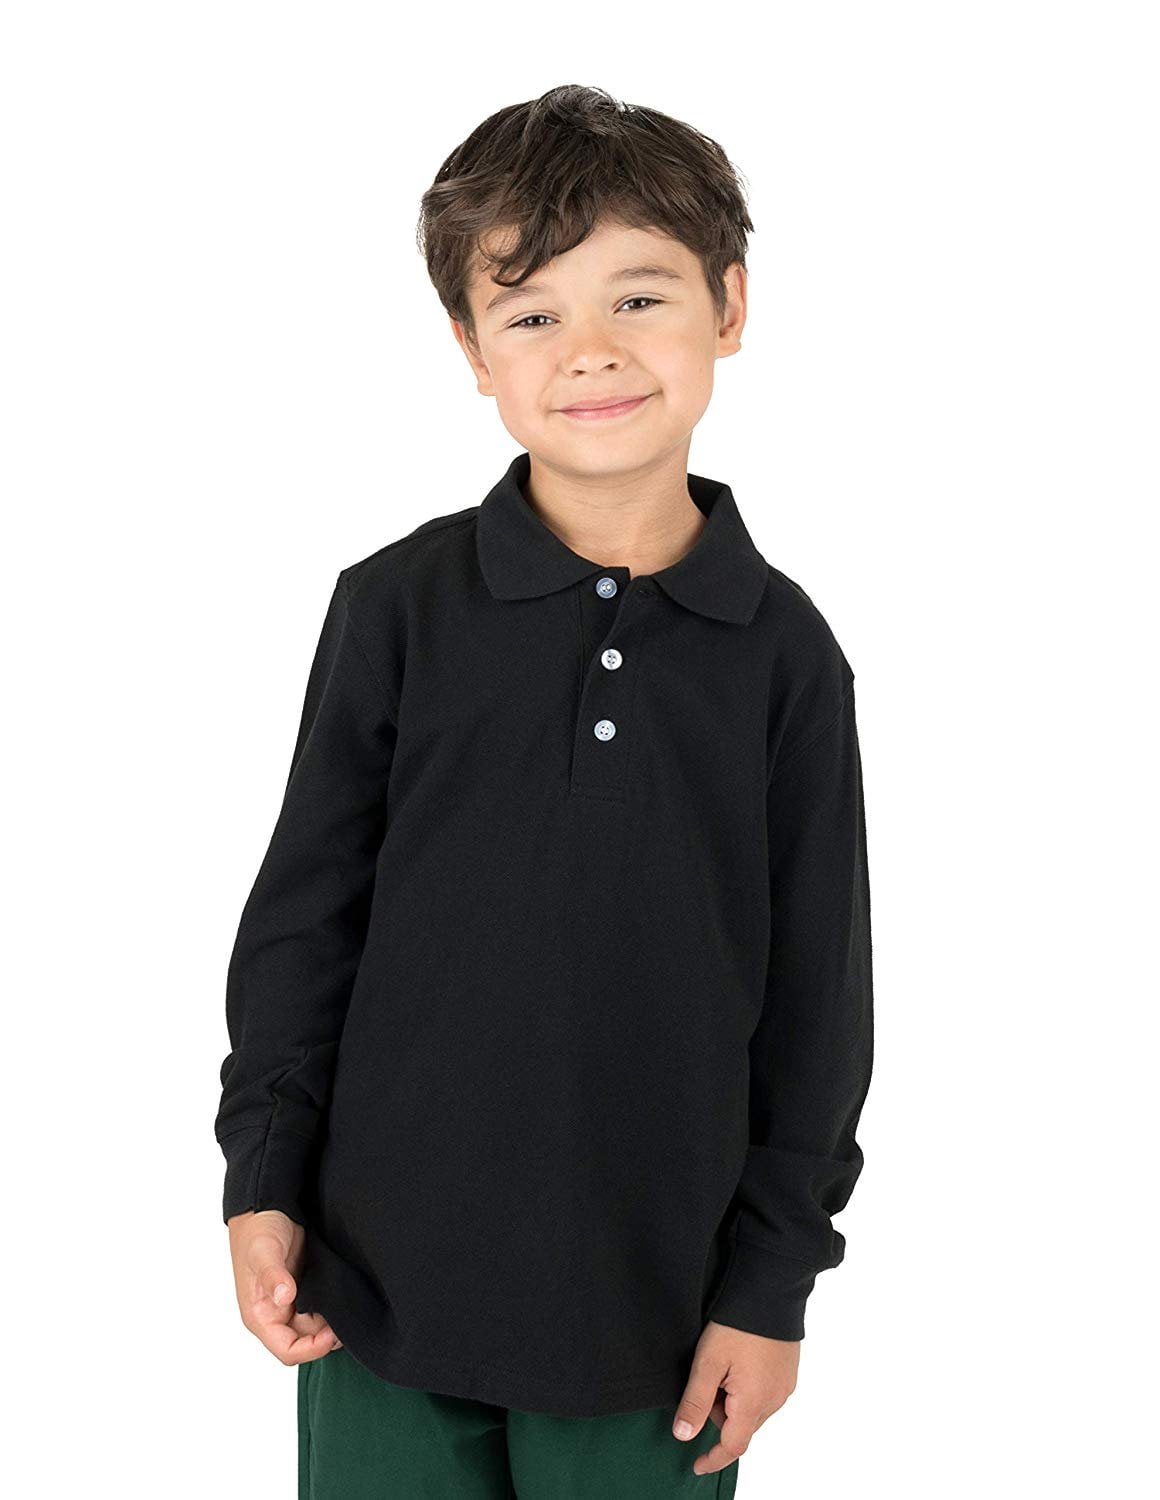 Leveret Kids & Toddler Boys Girls Long Sleeve 100% Cotton Uniform Polo Shirt Variety of Colors Size 2-14 Years